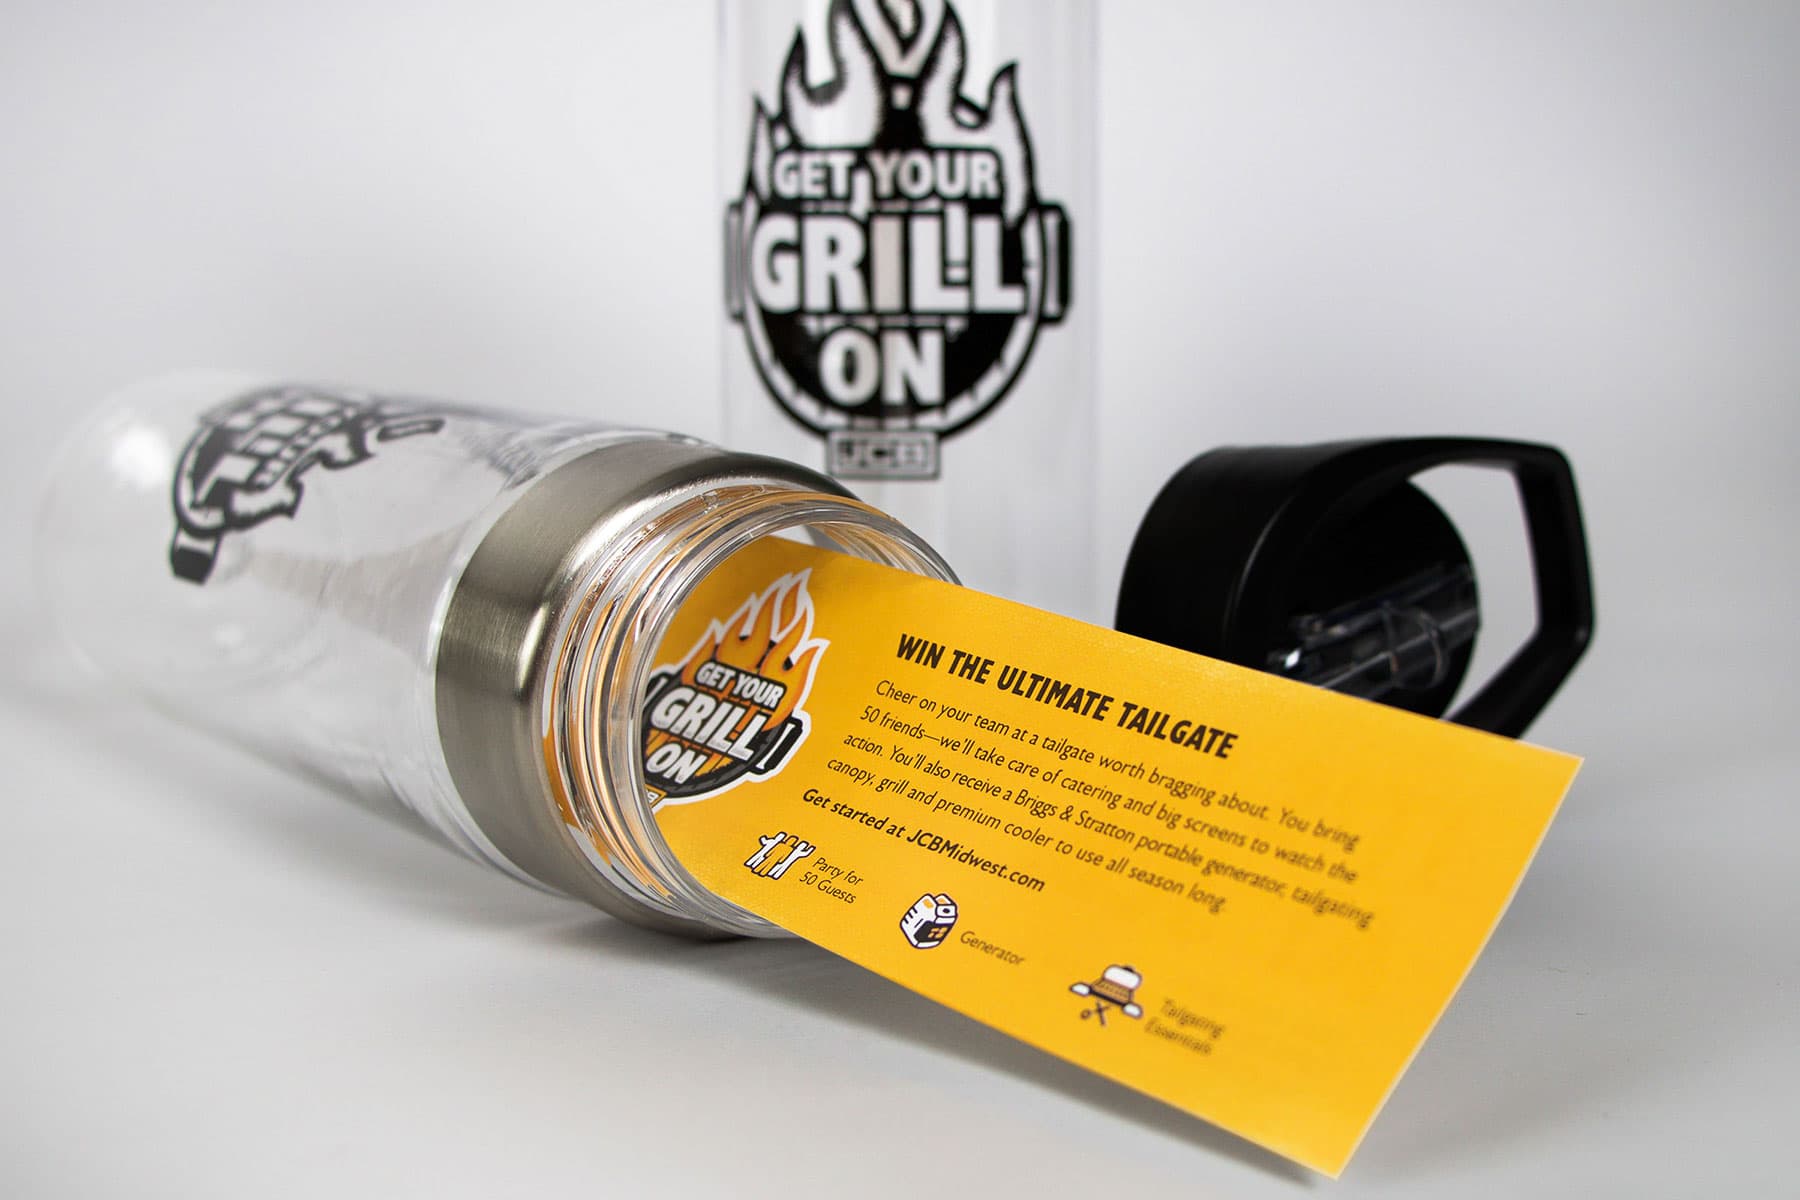 get your grill on promotional water bottle